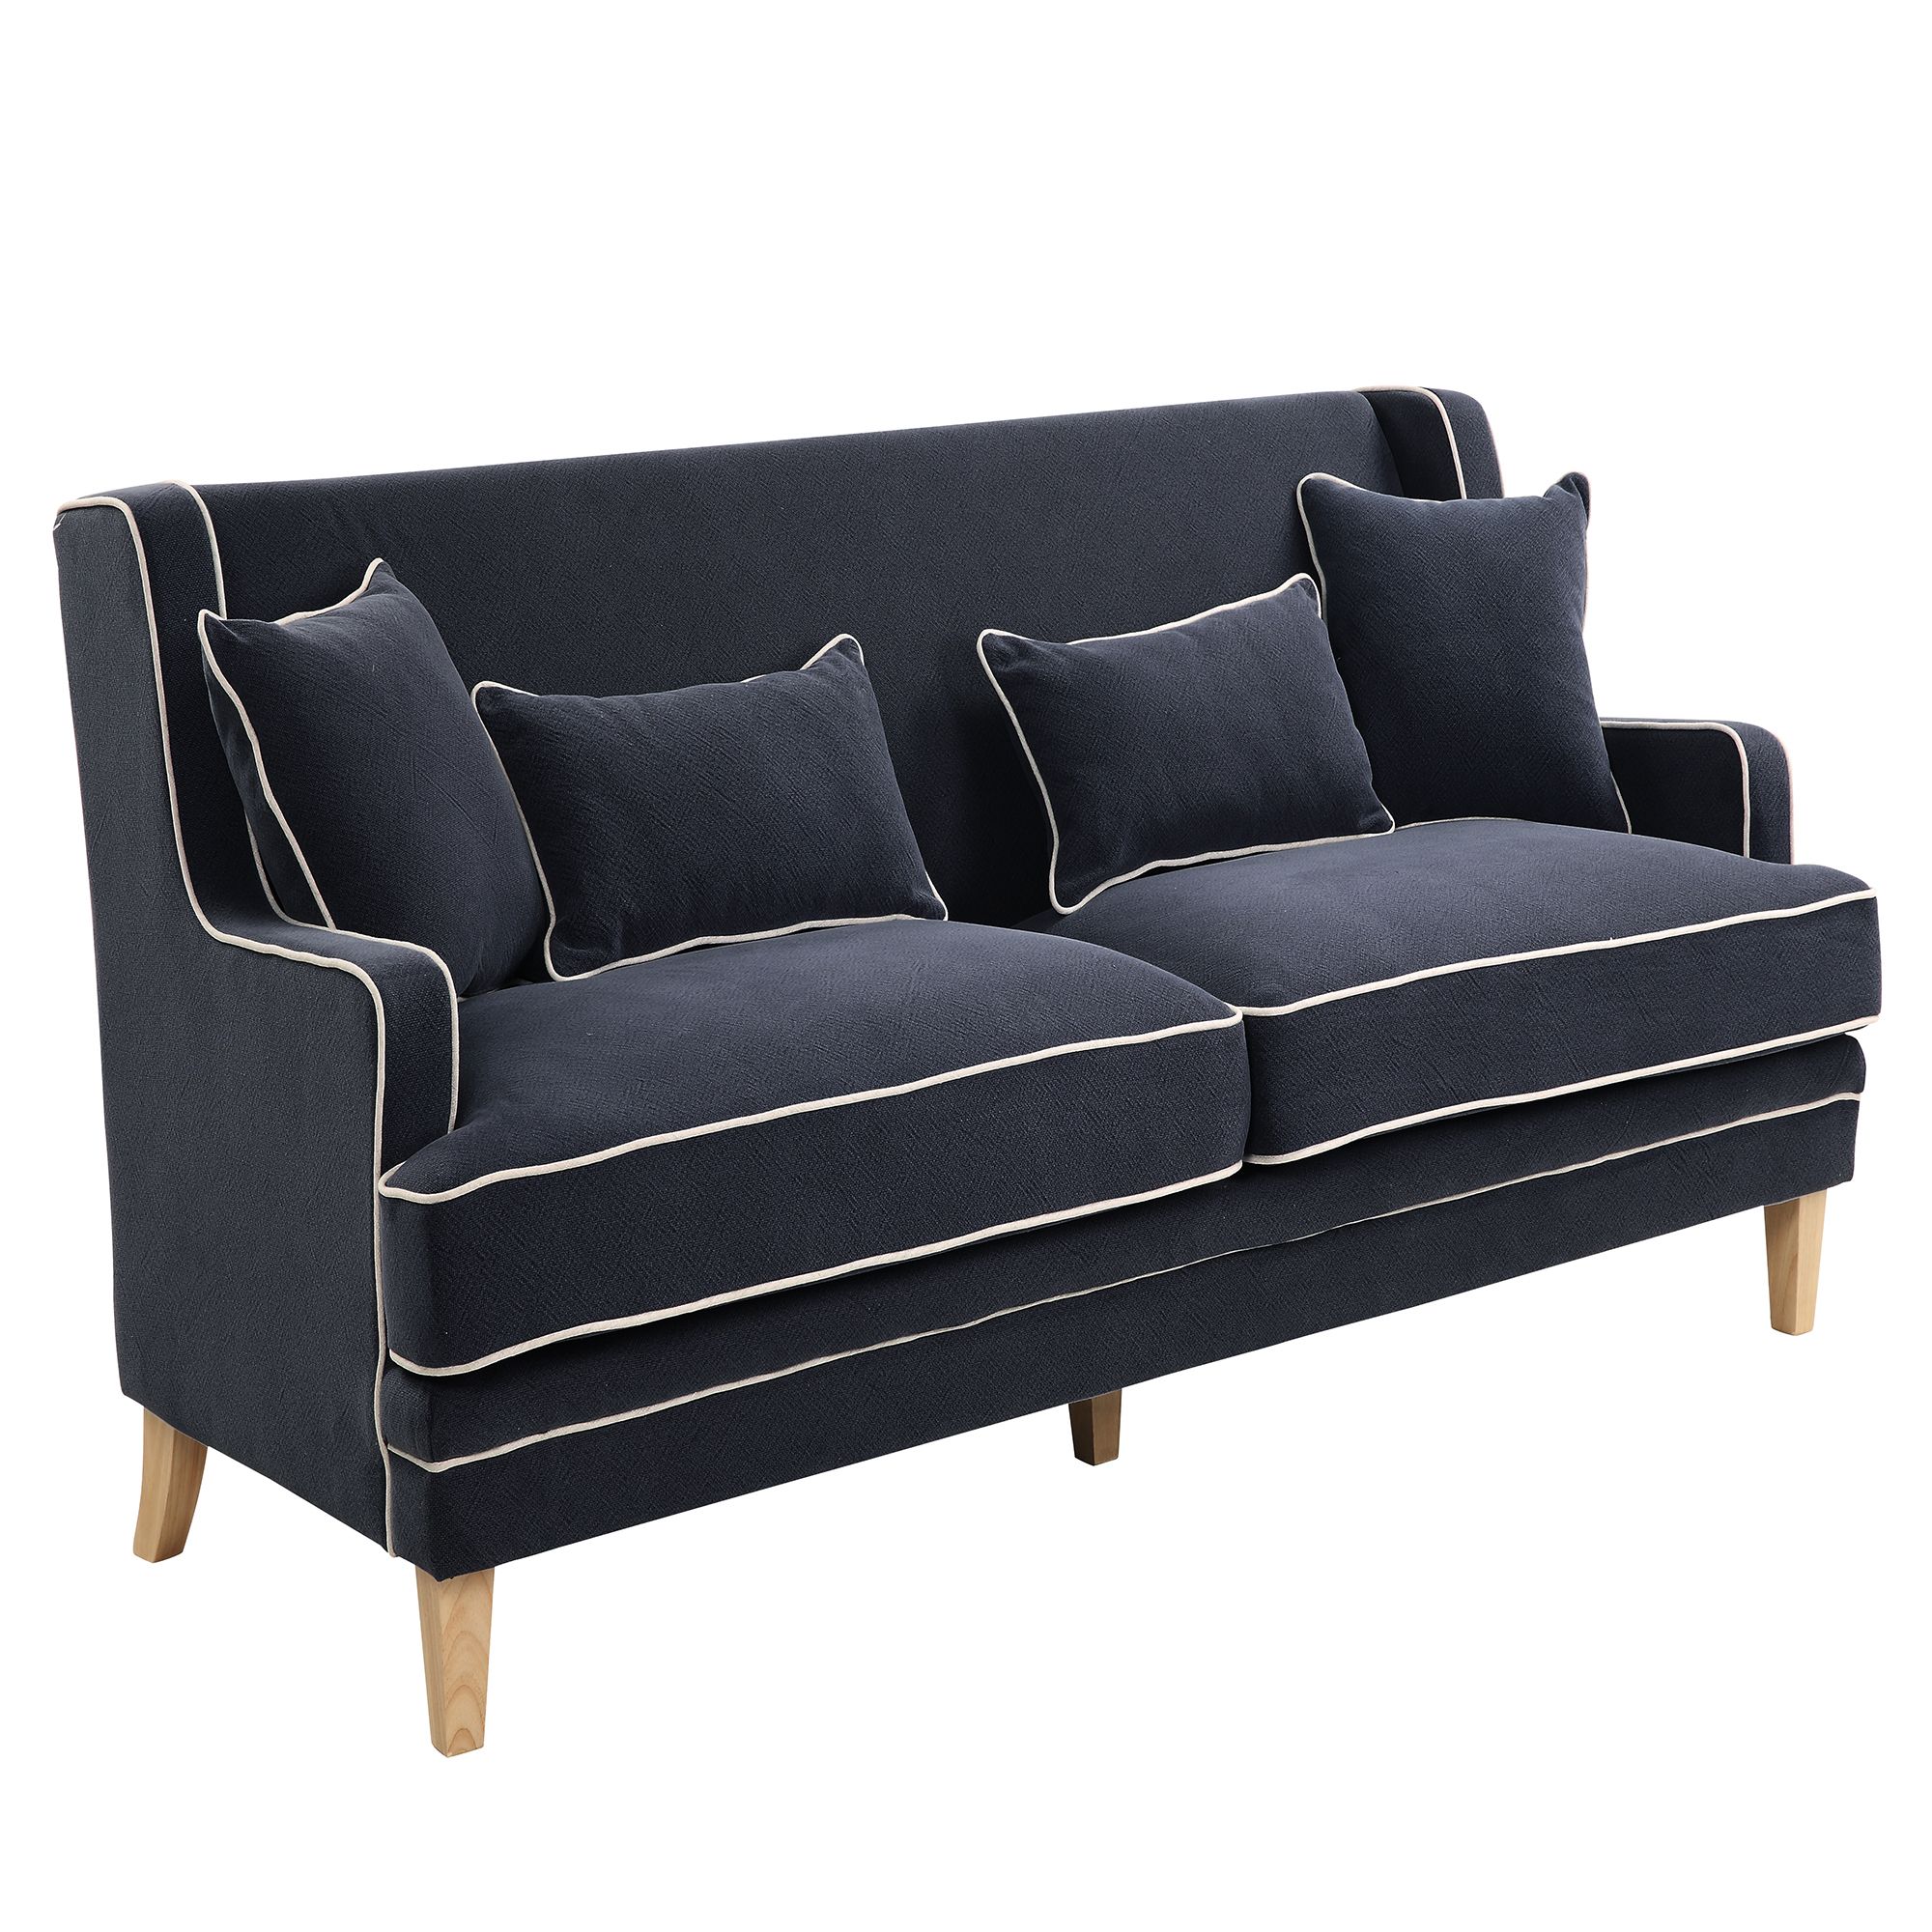 Bondi 3 Seat Sofa Navy And White Piping | Country Interiors Regarding Navy Linen Coil Sofas (Gallery 14 of 20)